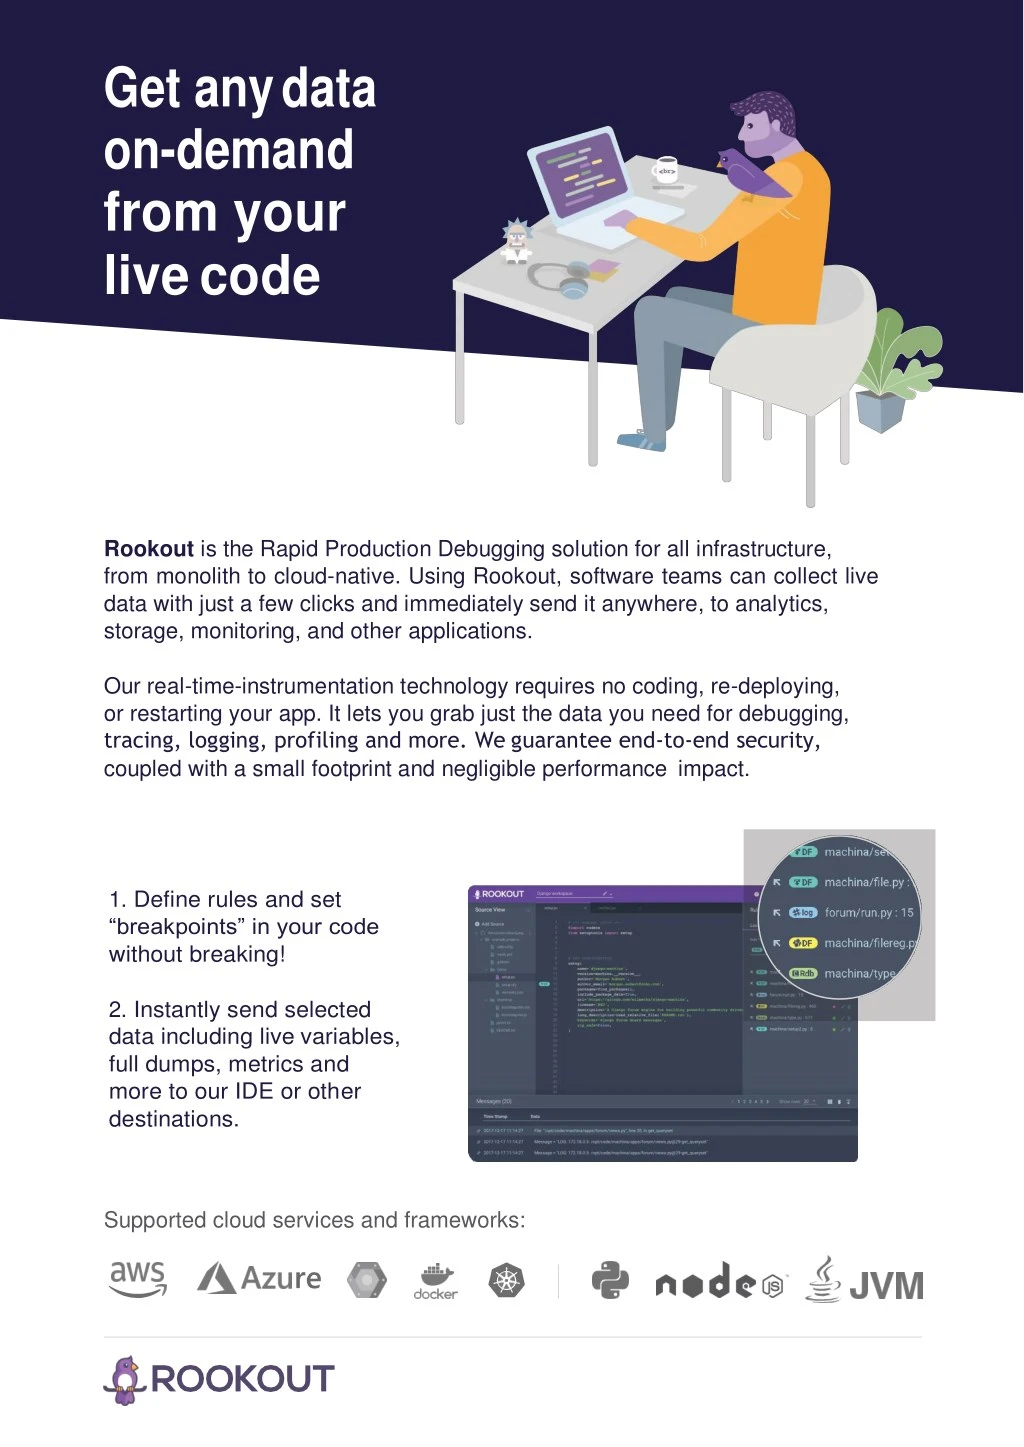 get any data on demand from your live code